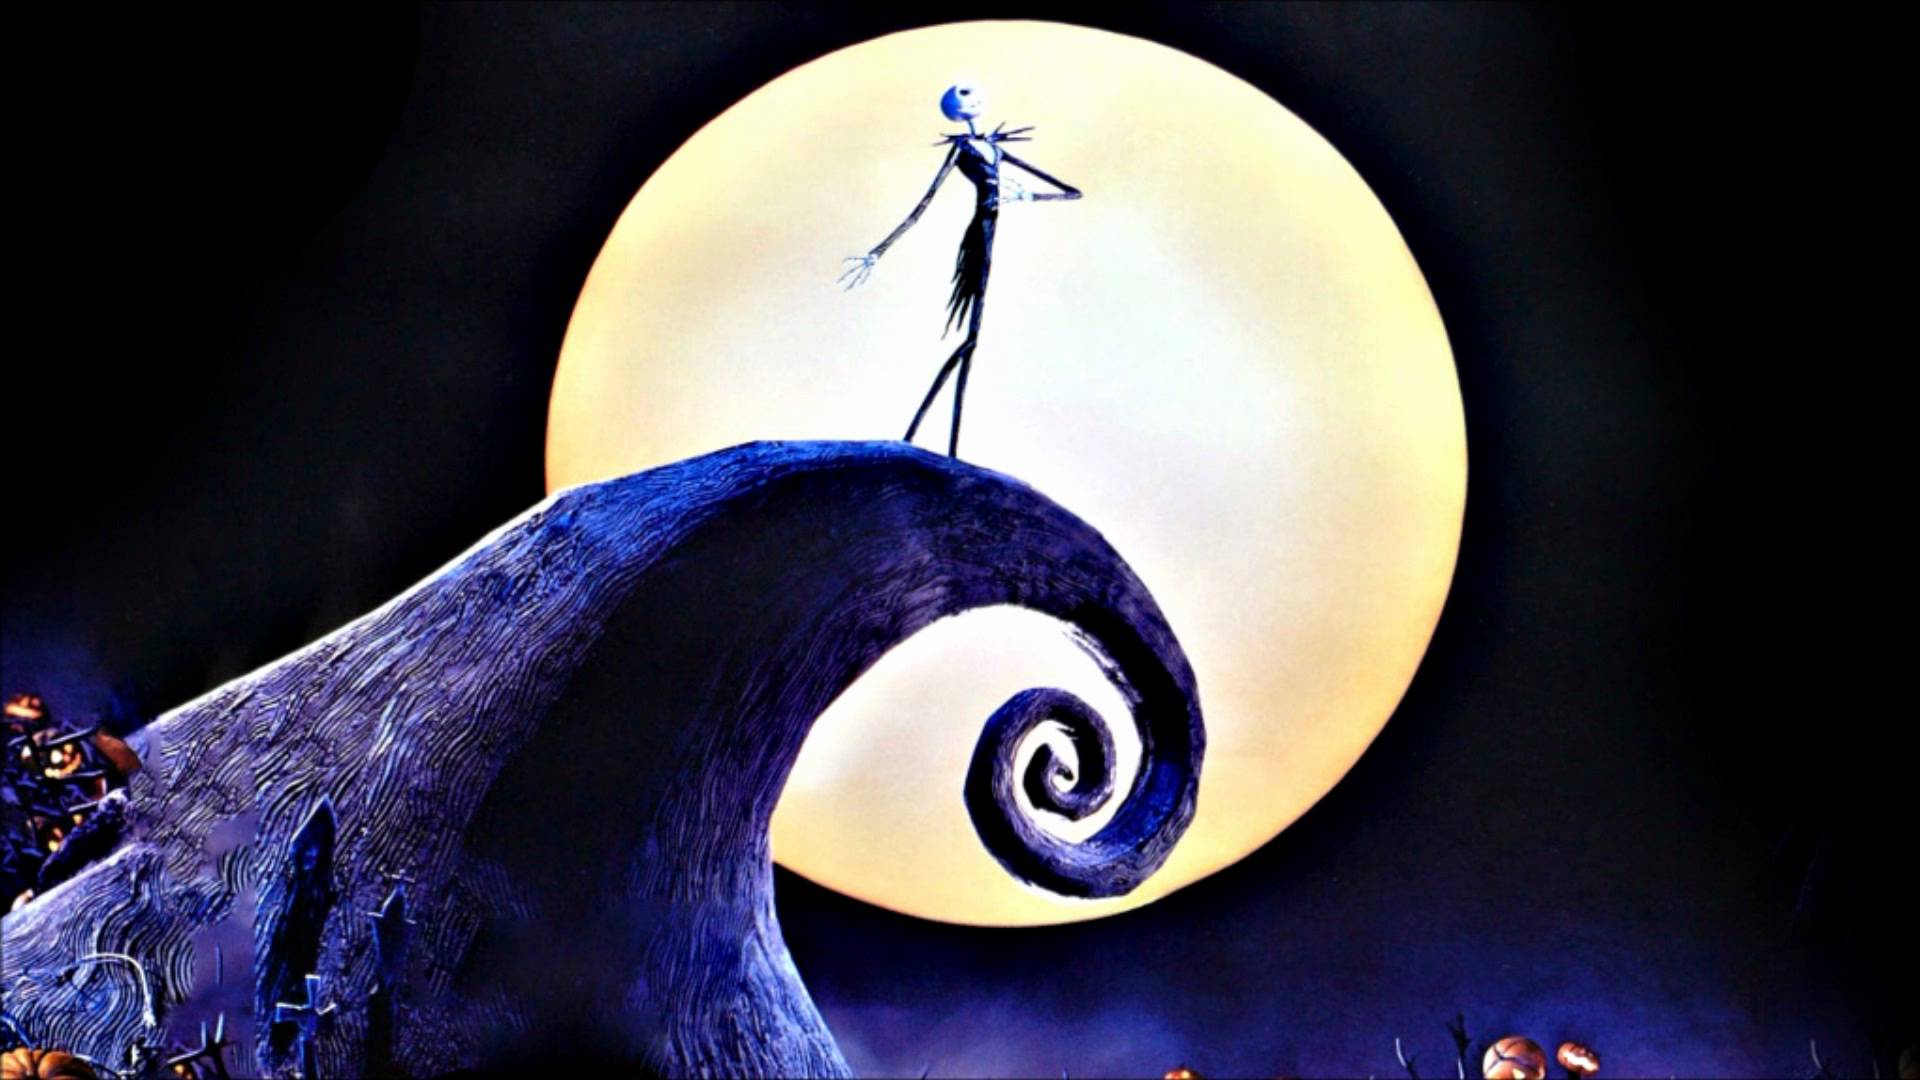 Nightmare Before Christmas IPhone Wallpaper 66 images